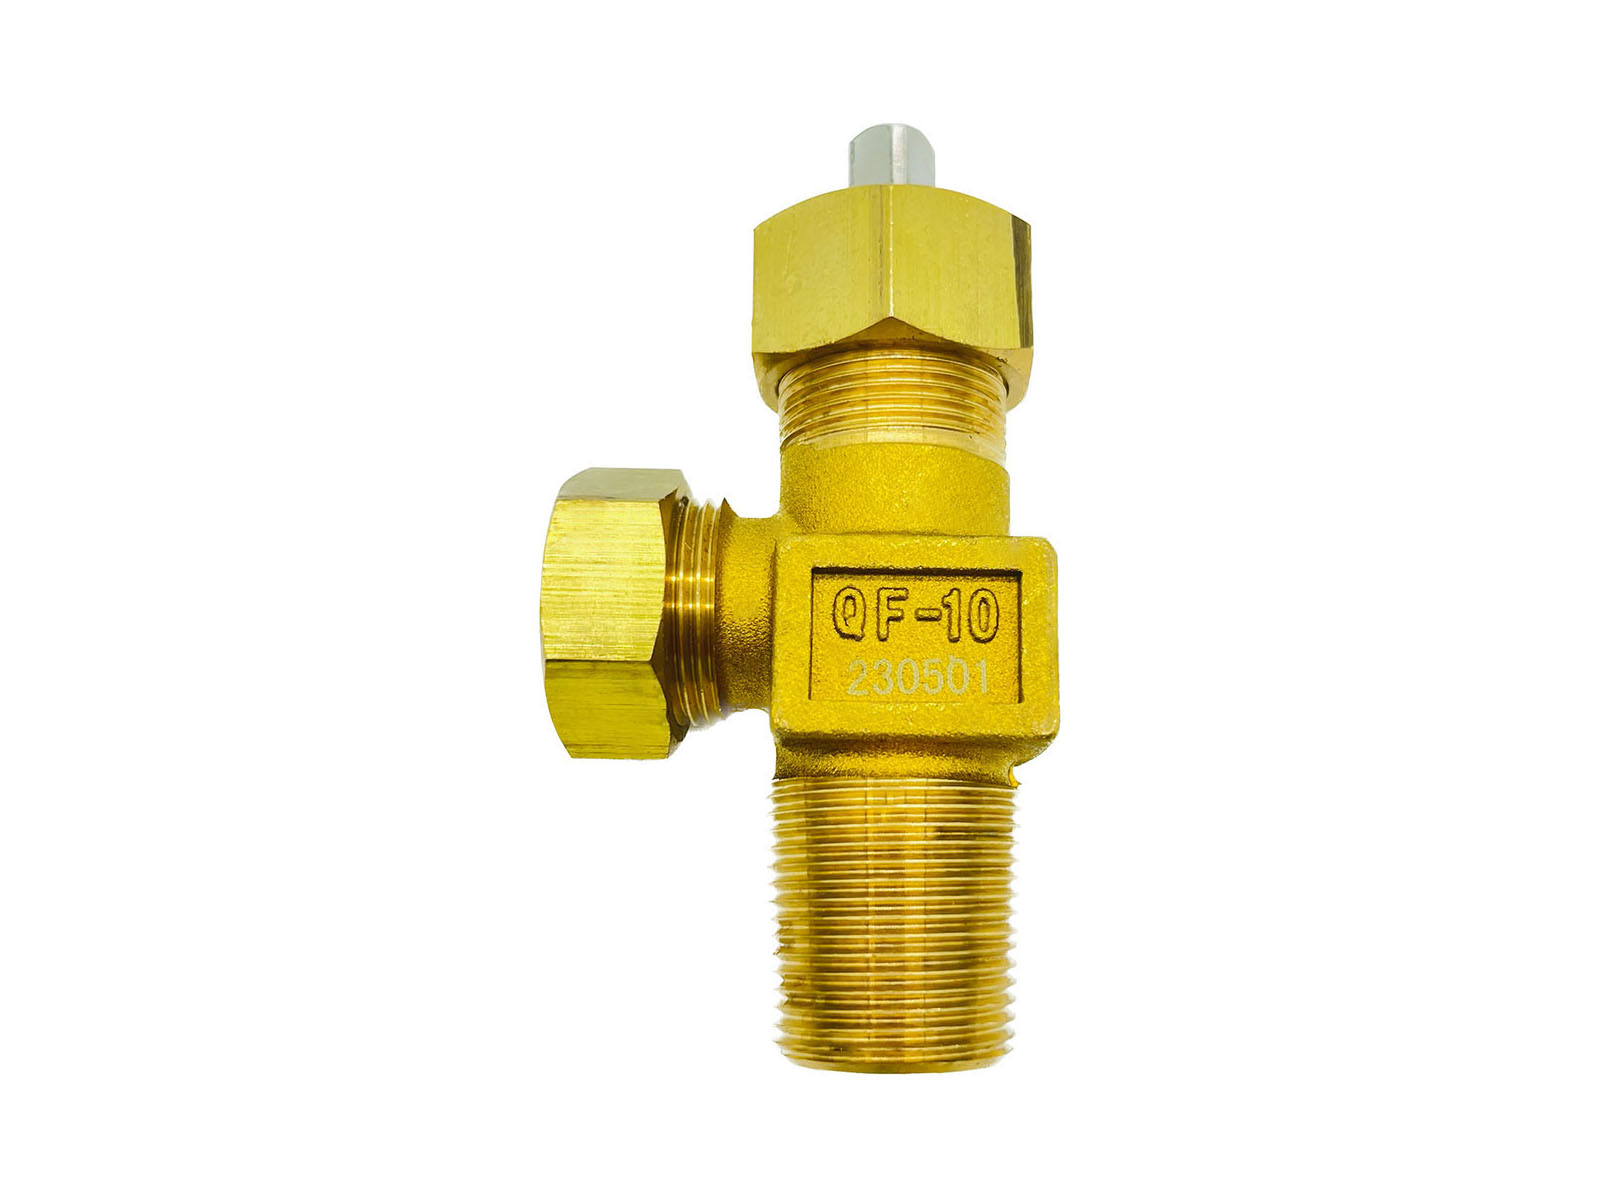 Chlorine Gas Handling Made Safer and Easier with Cl2 Valves